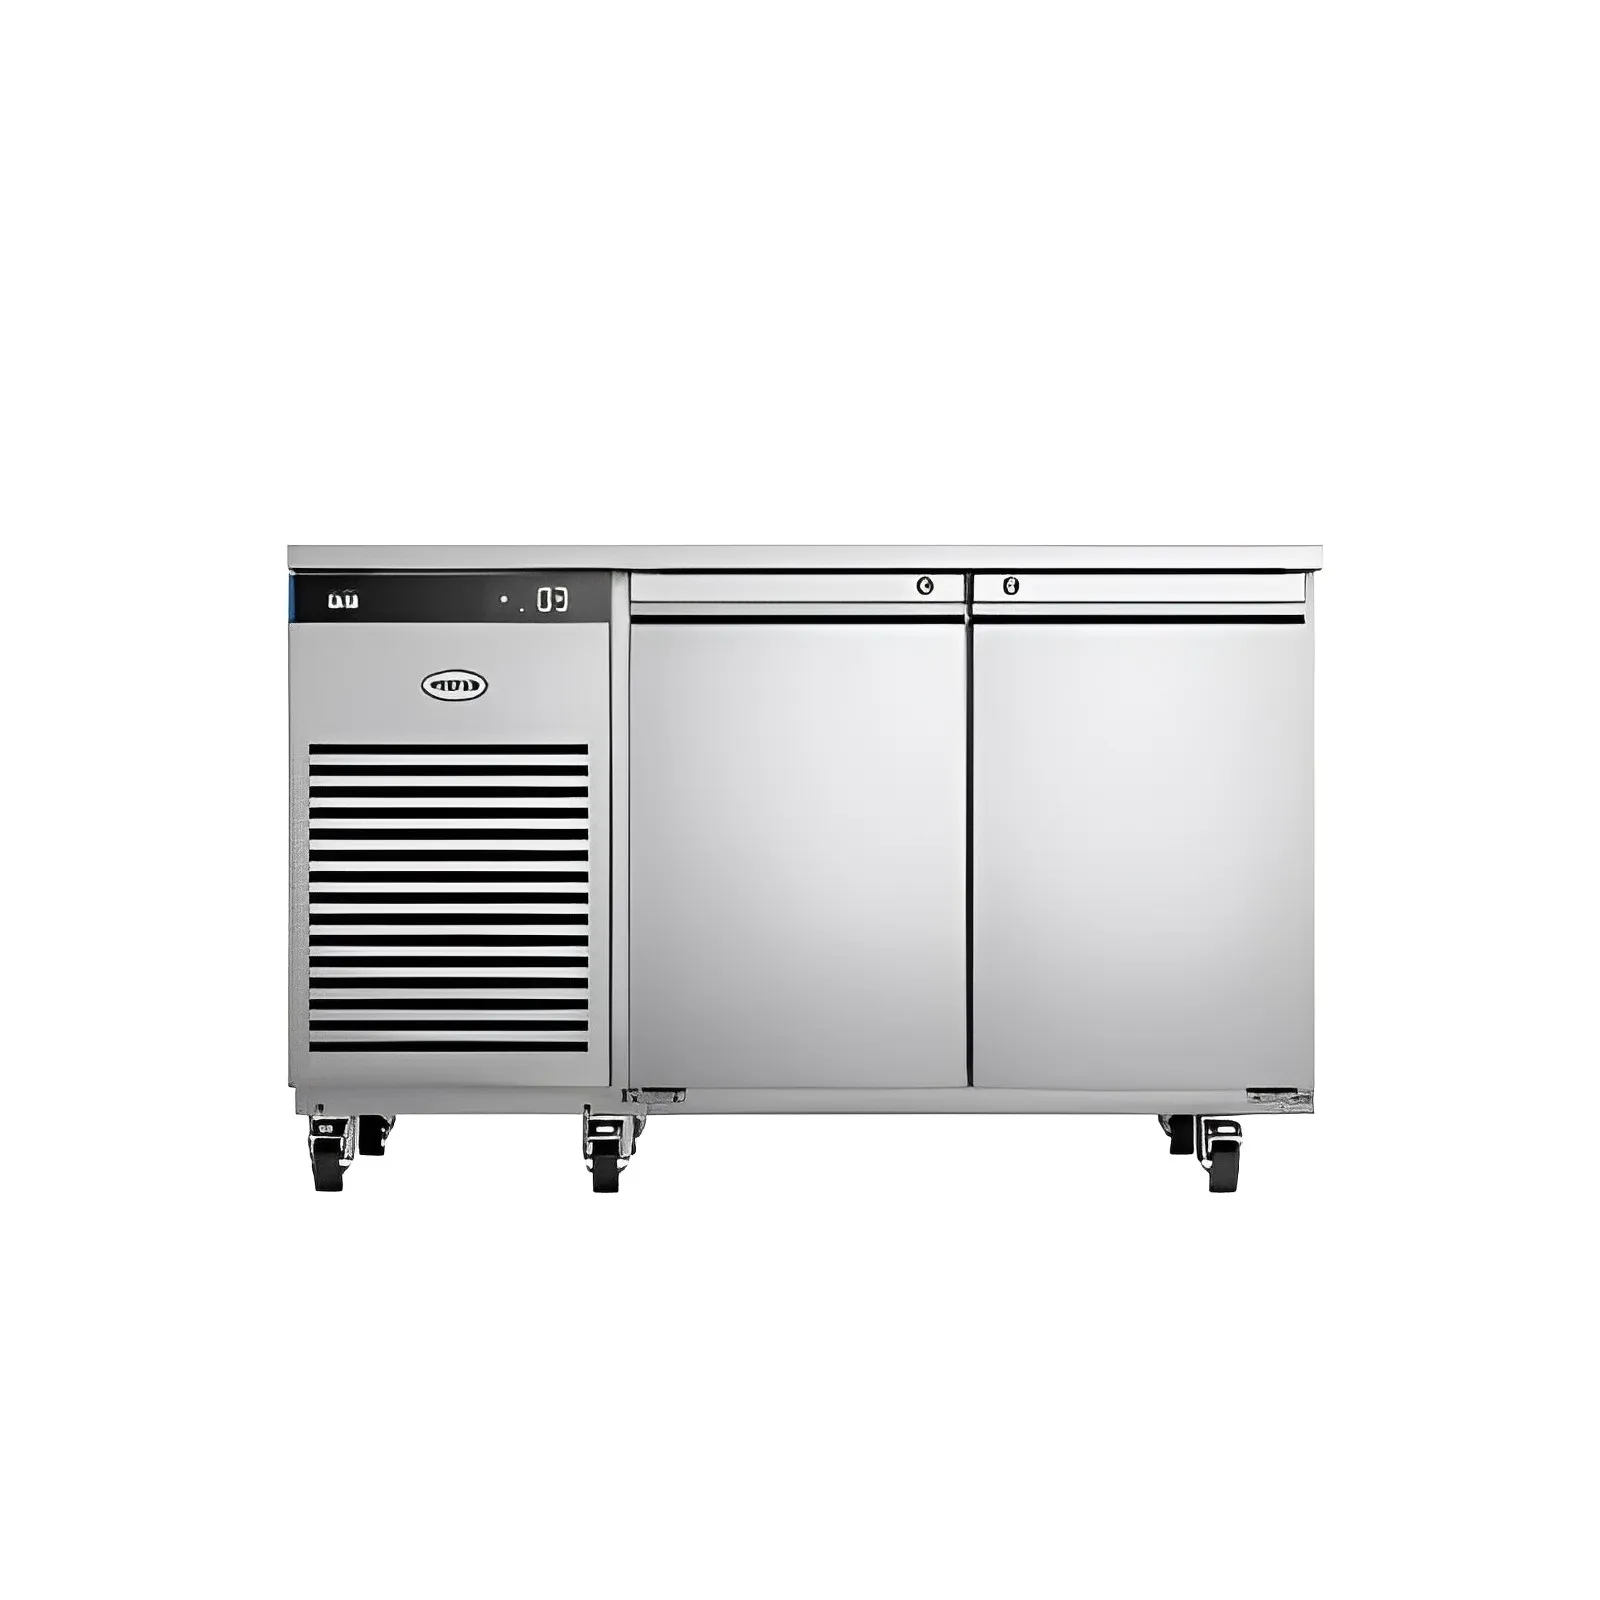 Foster EP1/2H/43-148 G3 EcoPro 2 Door Refrigerated Counter with Drawers, 280 Litres